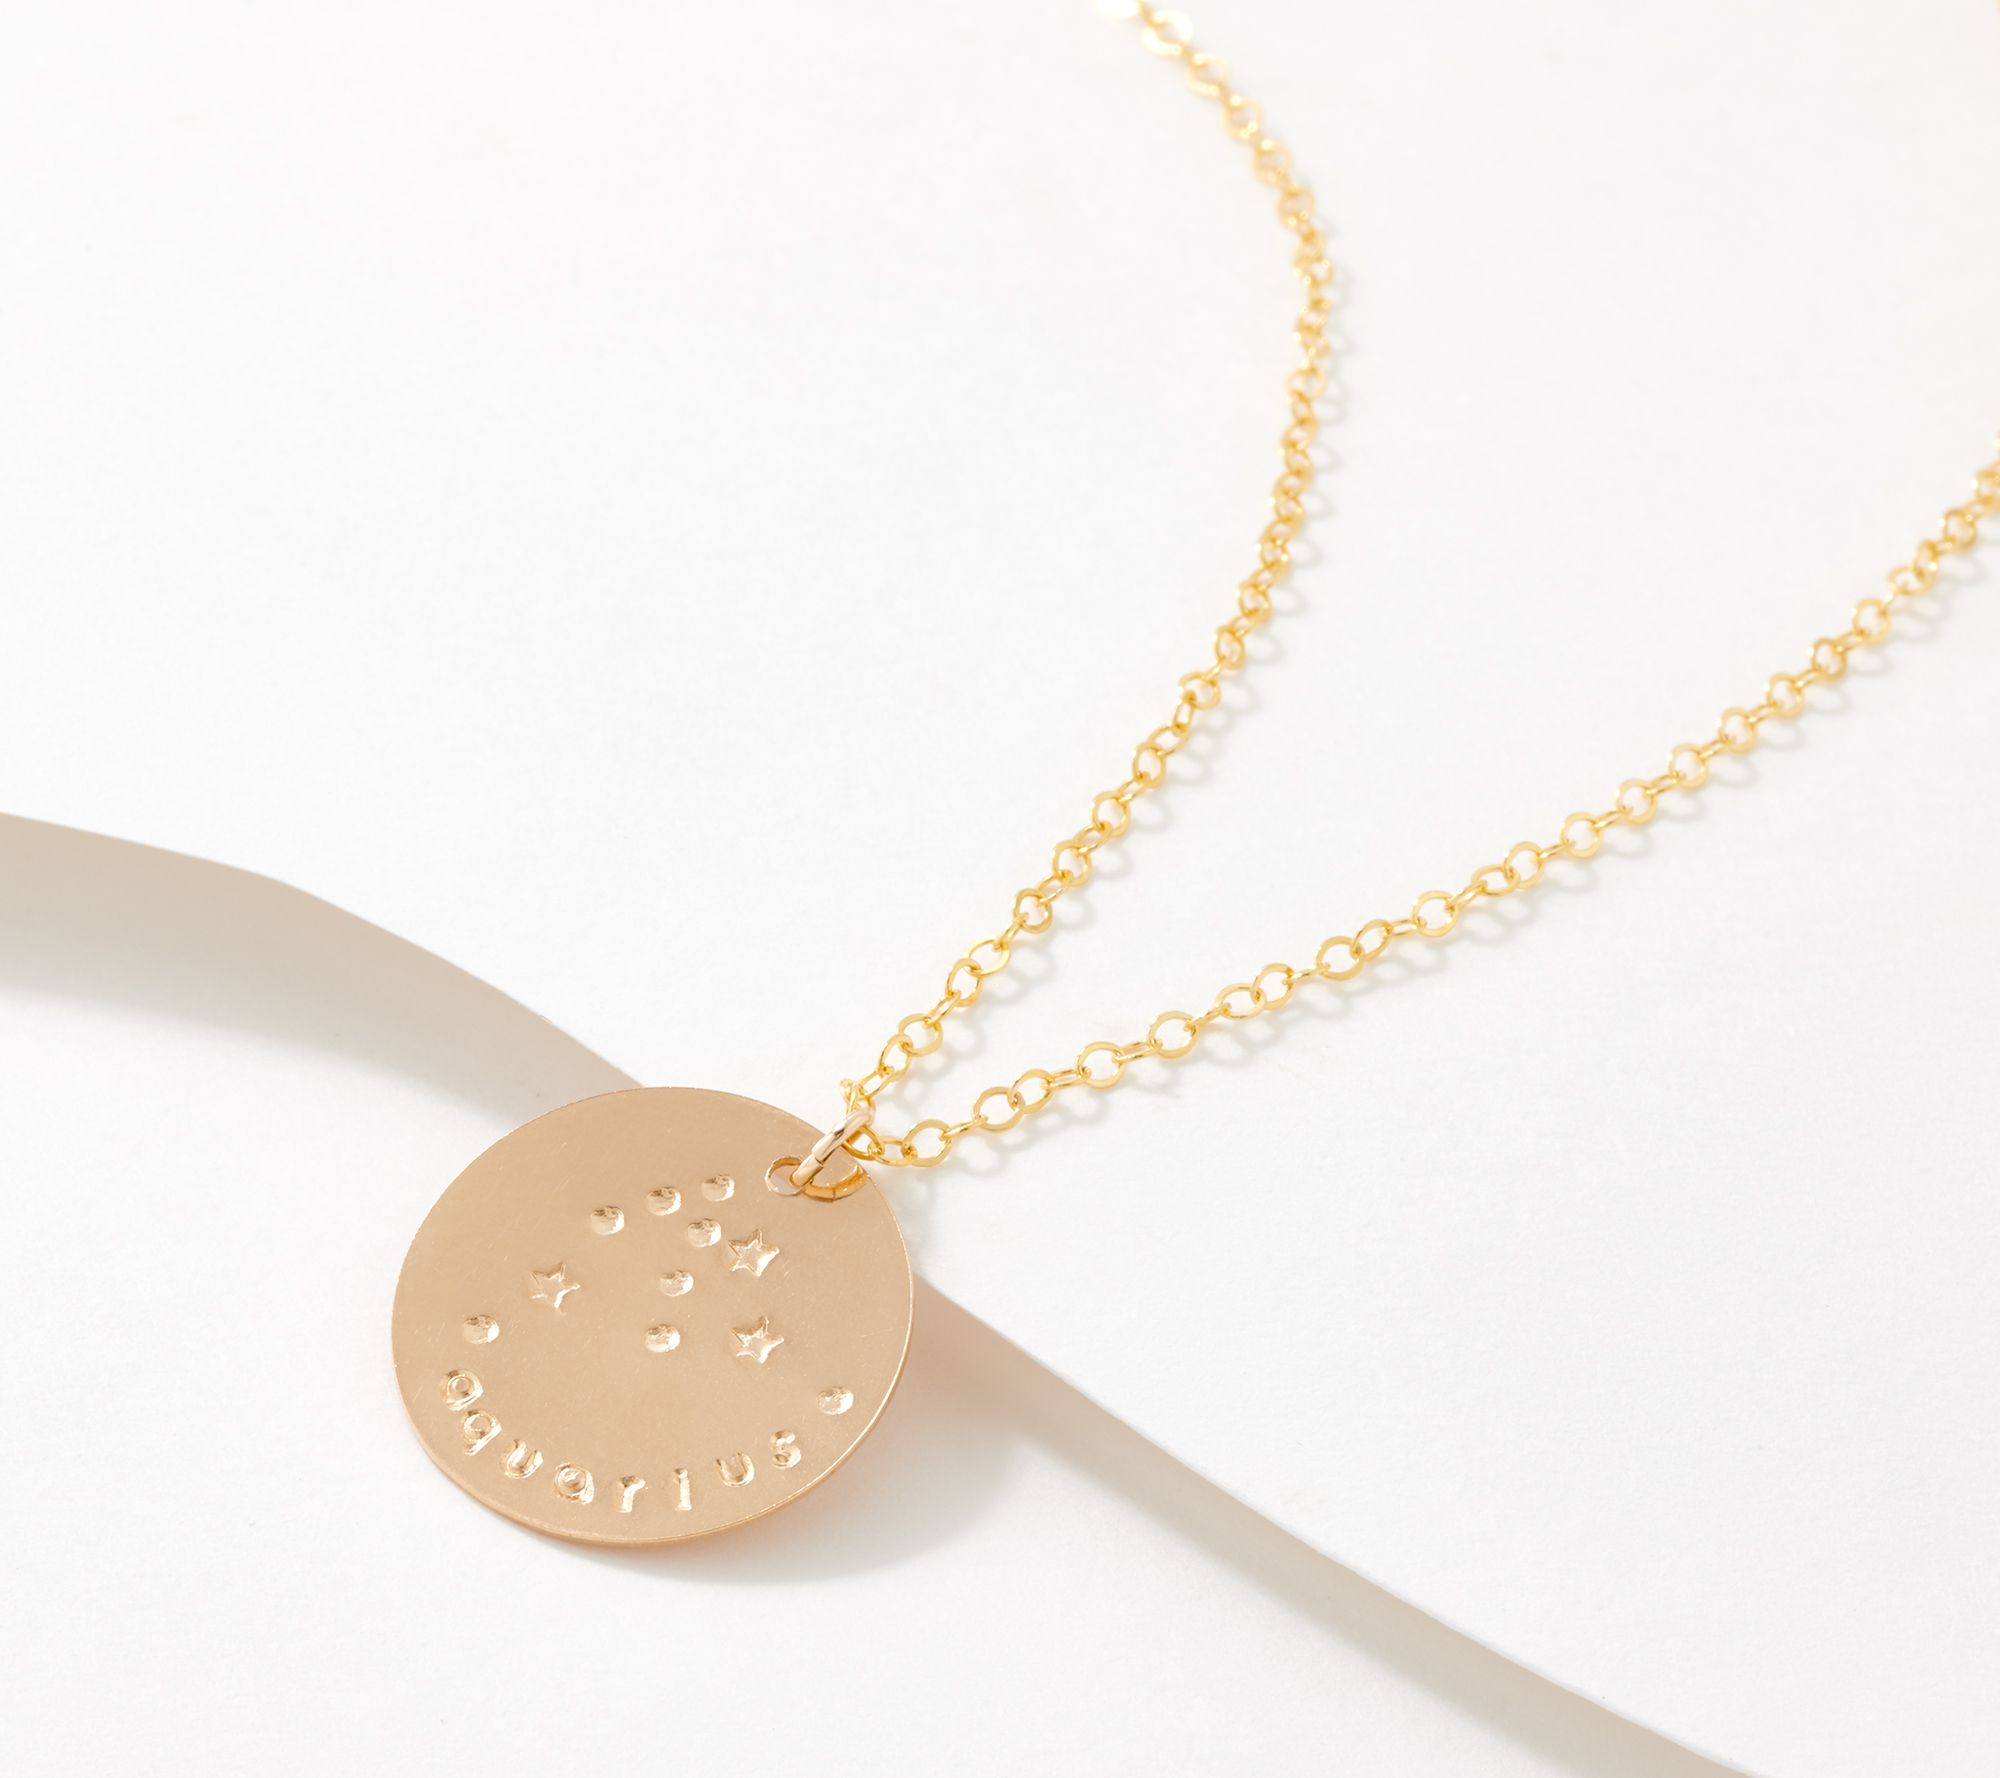 Taudrey Give Me A Sign Constellation Circular Charm Necklace - QVC.com